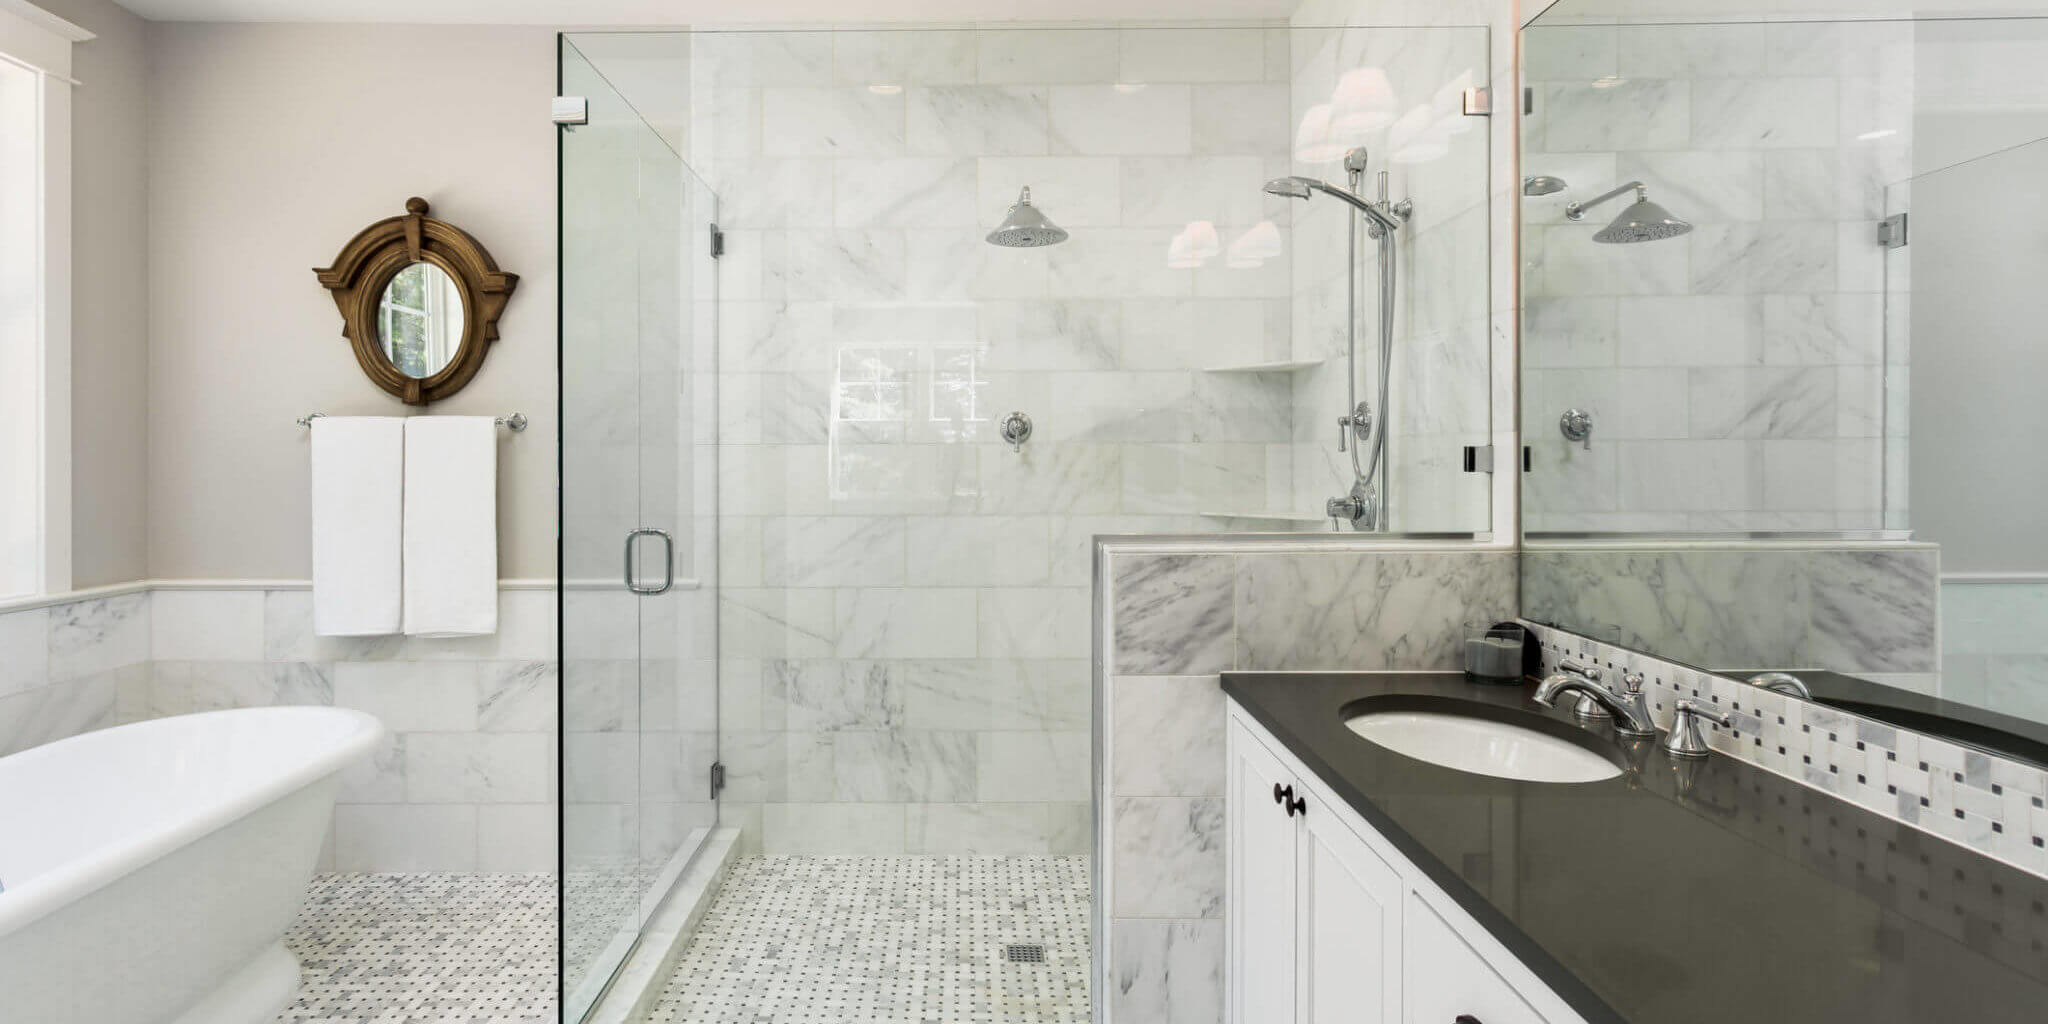 4 Inspiring Before and After Bathroom Renovations - International